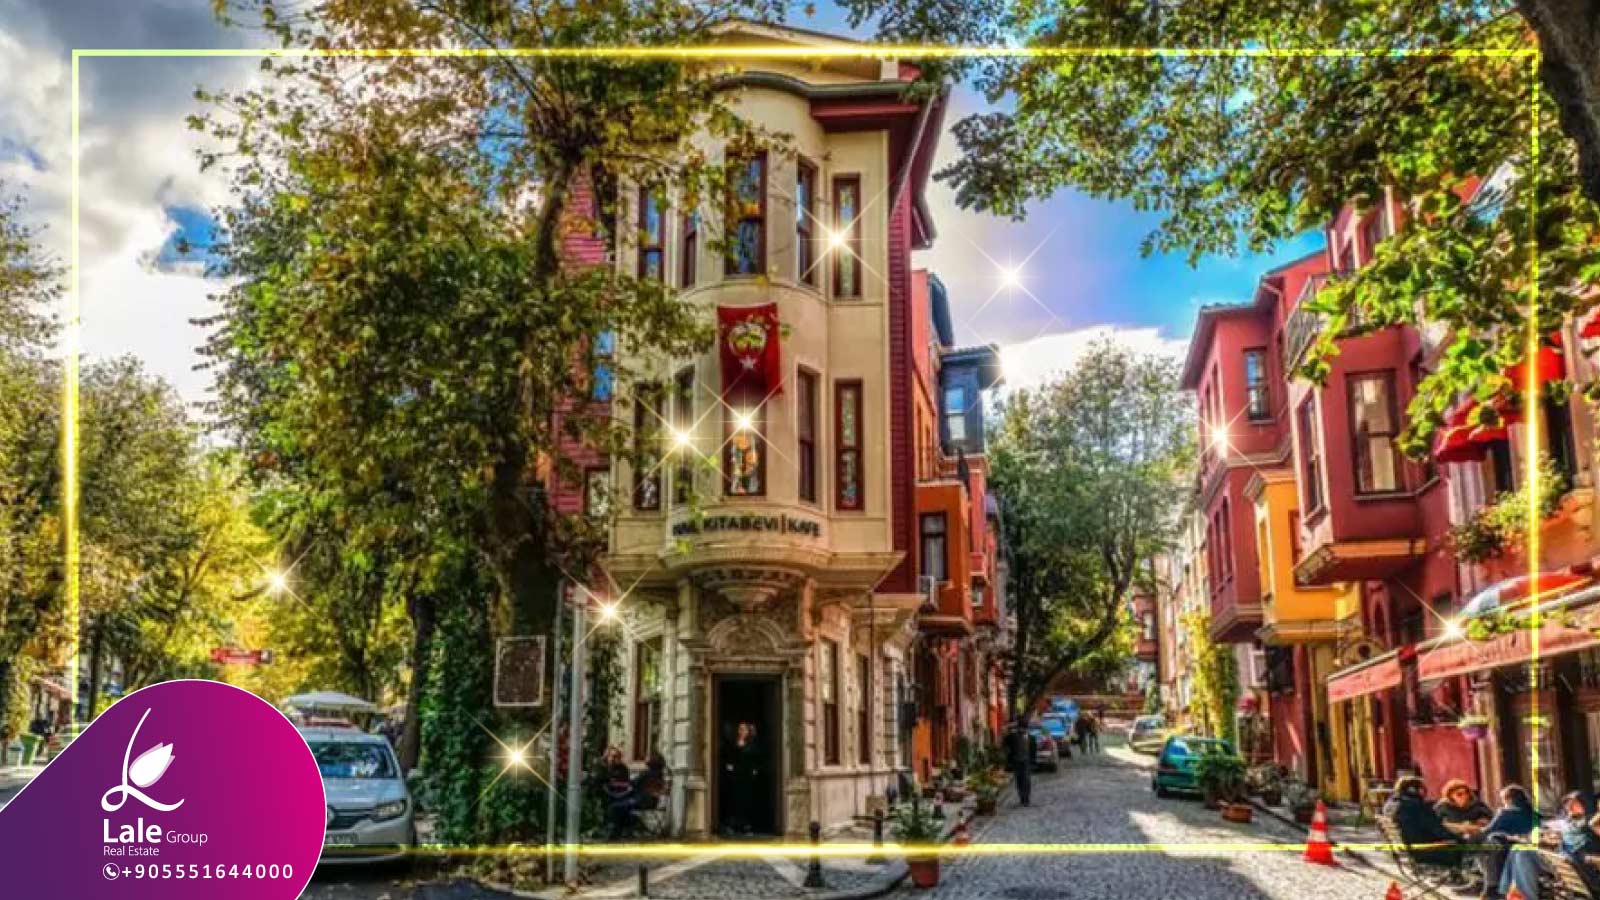 What To Do in Nisantasi, Istanbul Posh District - Travel with Pedro